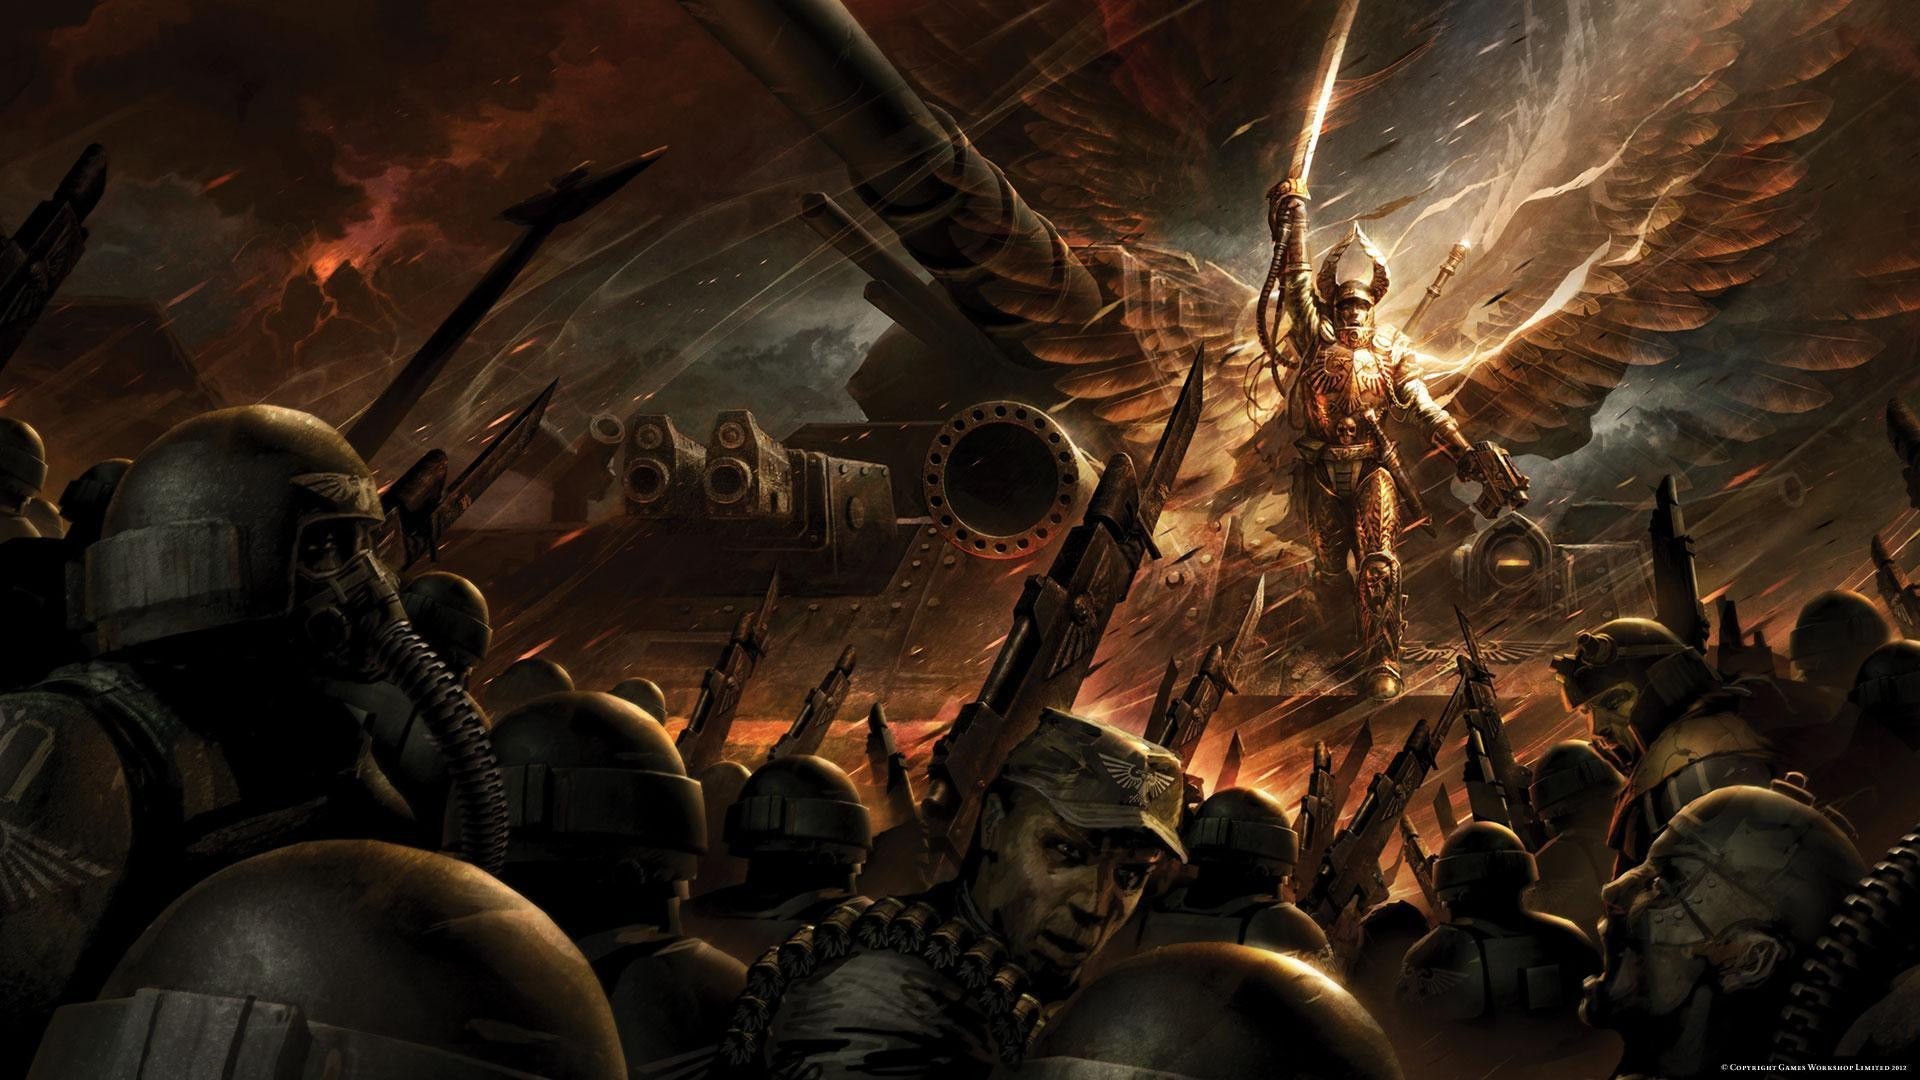 Explore Warhammer 40000, Solar, and more Imperial Guard wallpaper